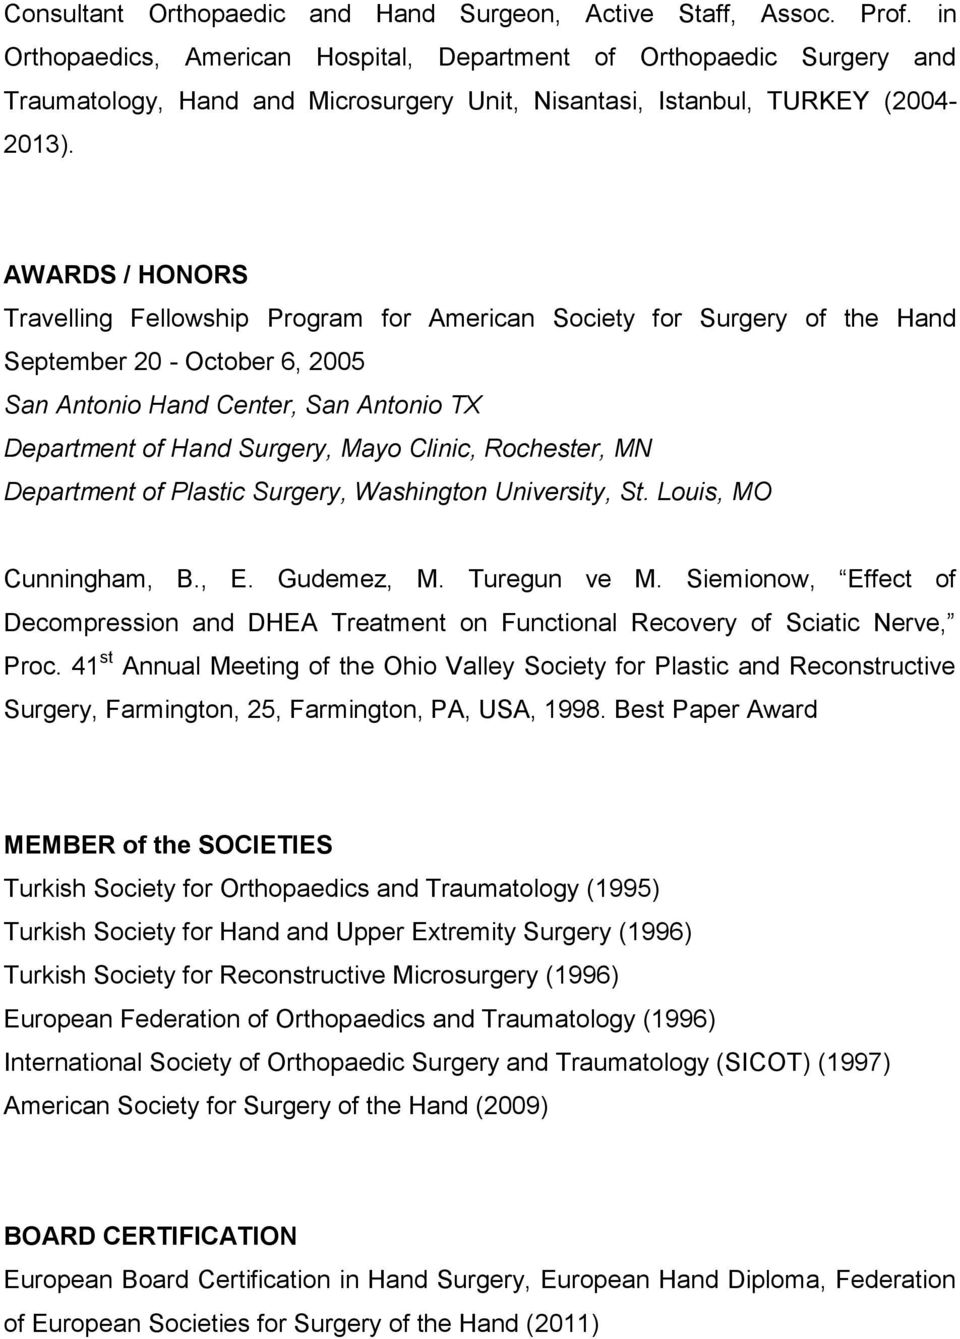 AWARDS / HONORS Travelling Fellowship Program for American Society for Surgery of the Hand September 20 - October 6, 2005 San Antonio Hand Center, San Antonio TX Department of Hand Surgery, Mayo